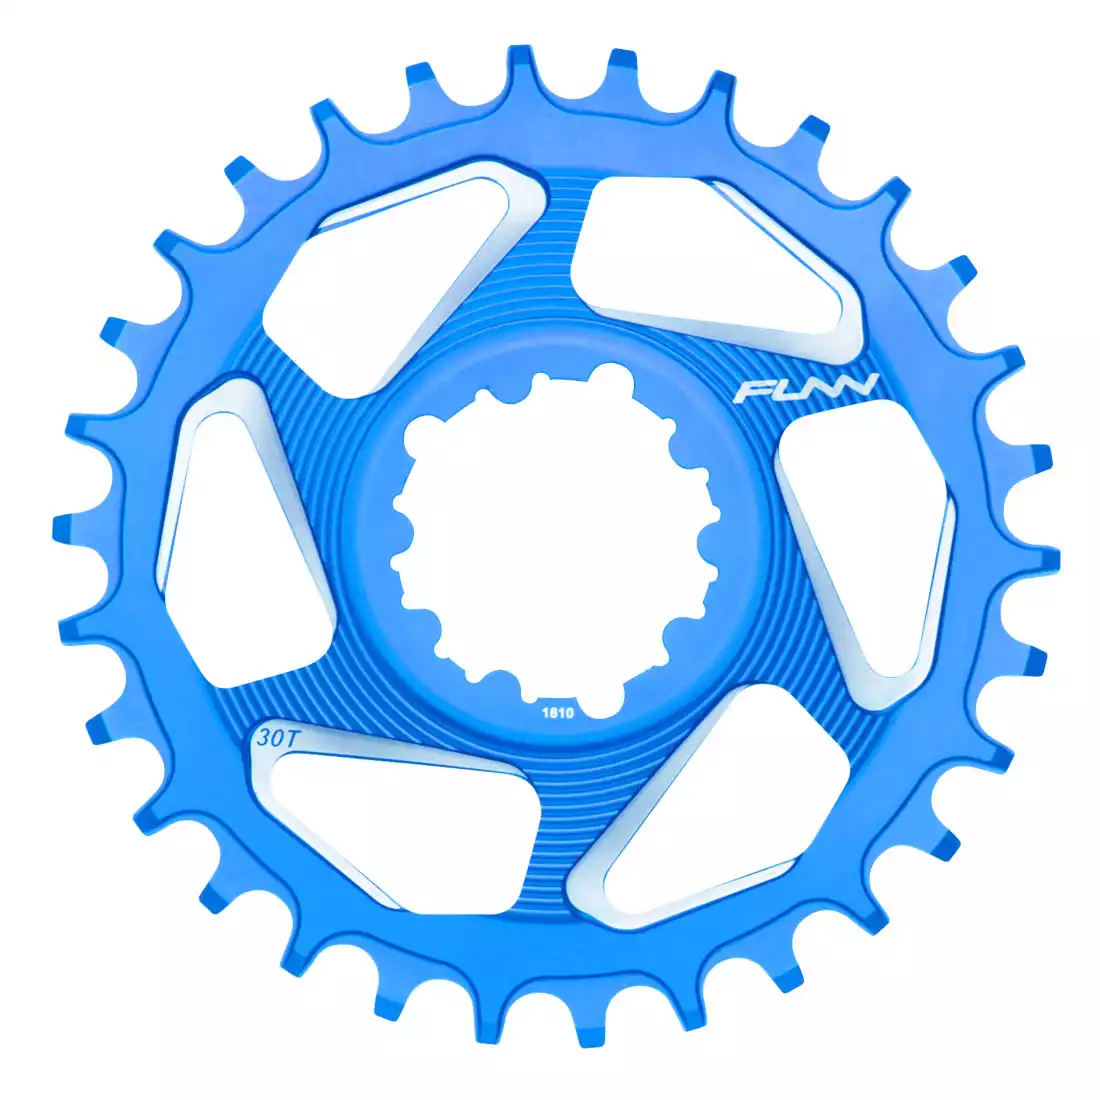 FUNN SOLO DX 28T NARROW- WIDE bicycle sprocket to crank blue